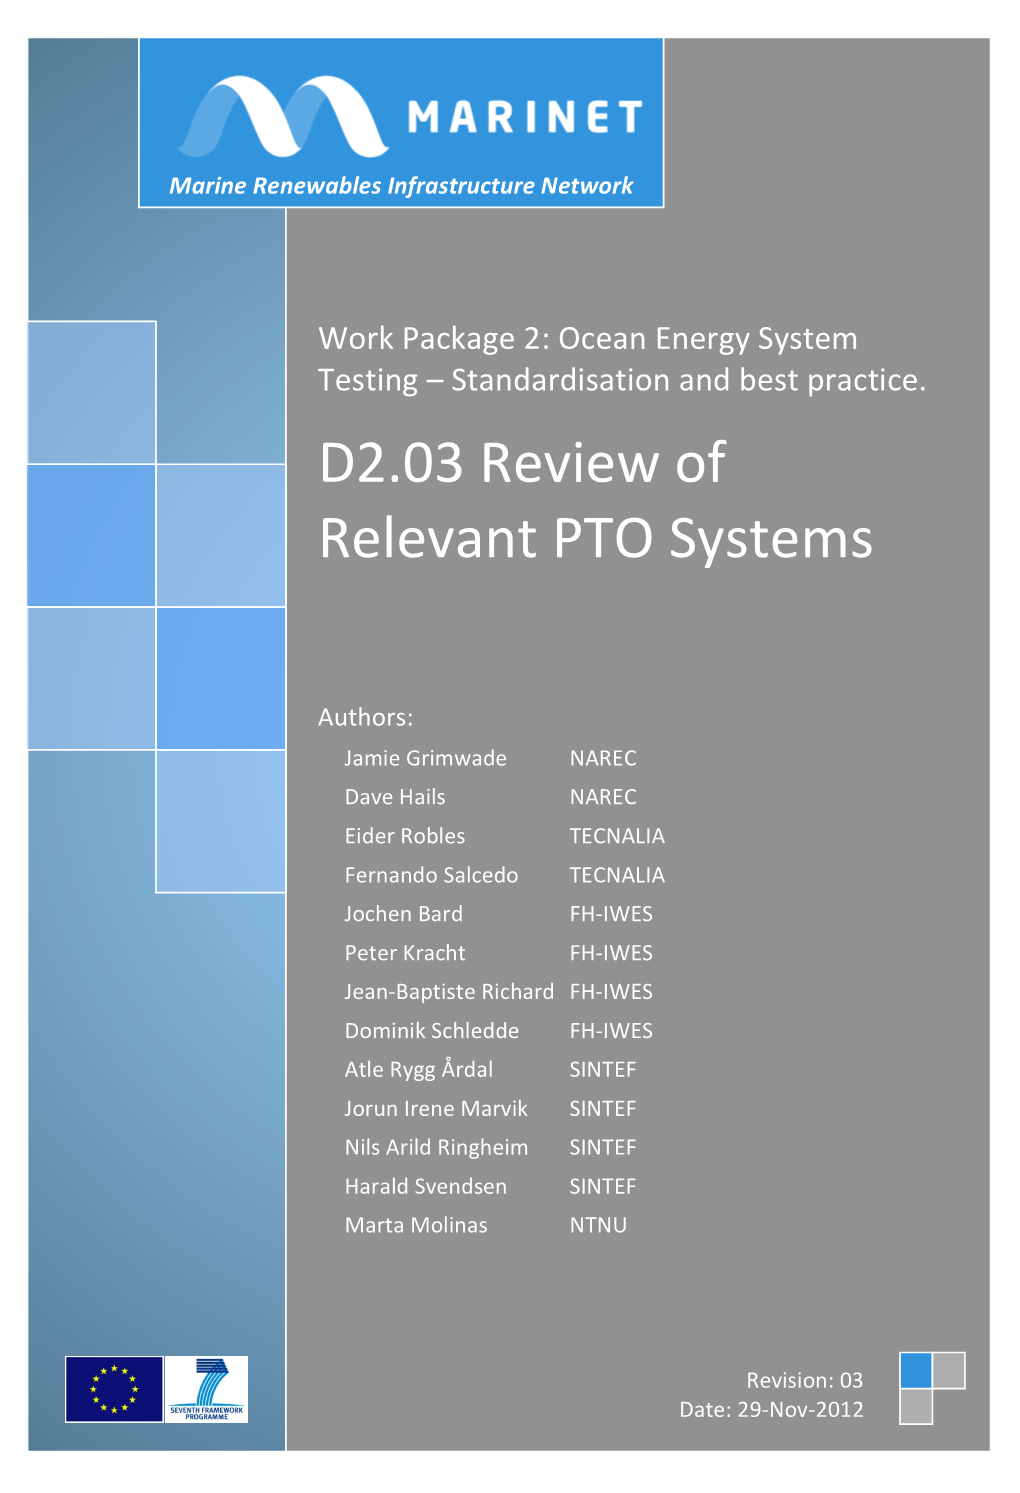 D2.03 Review of Relevant PTO Systems